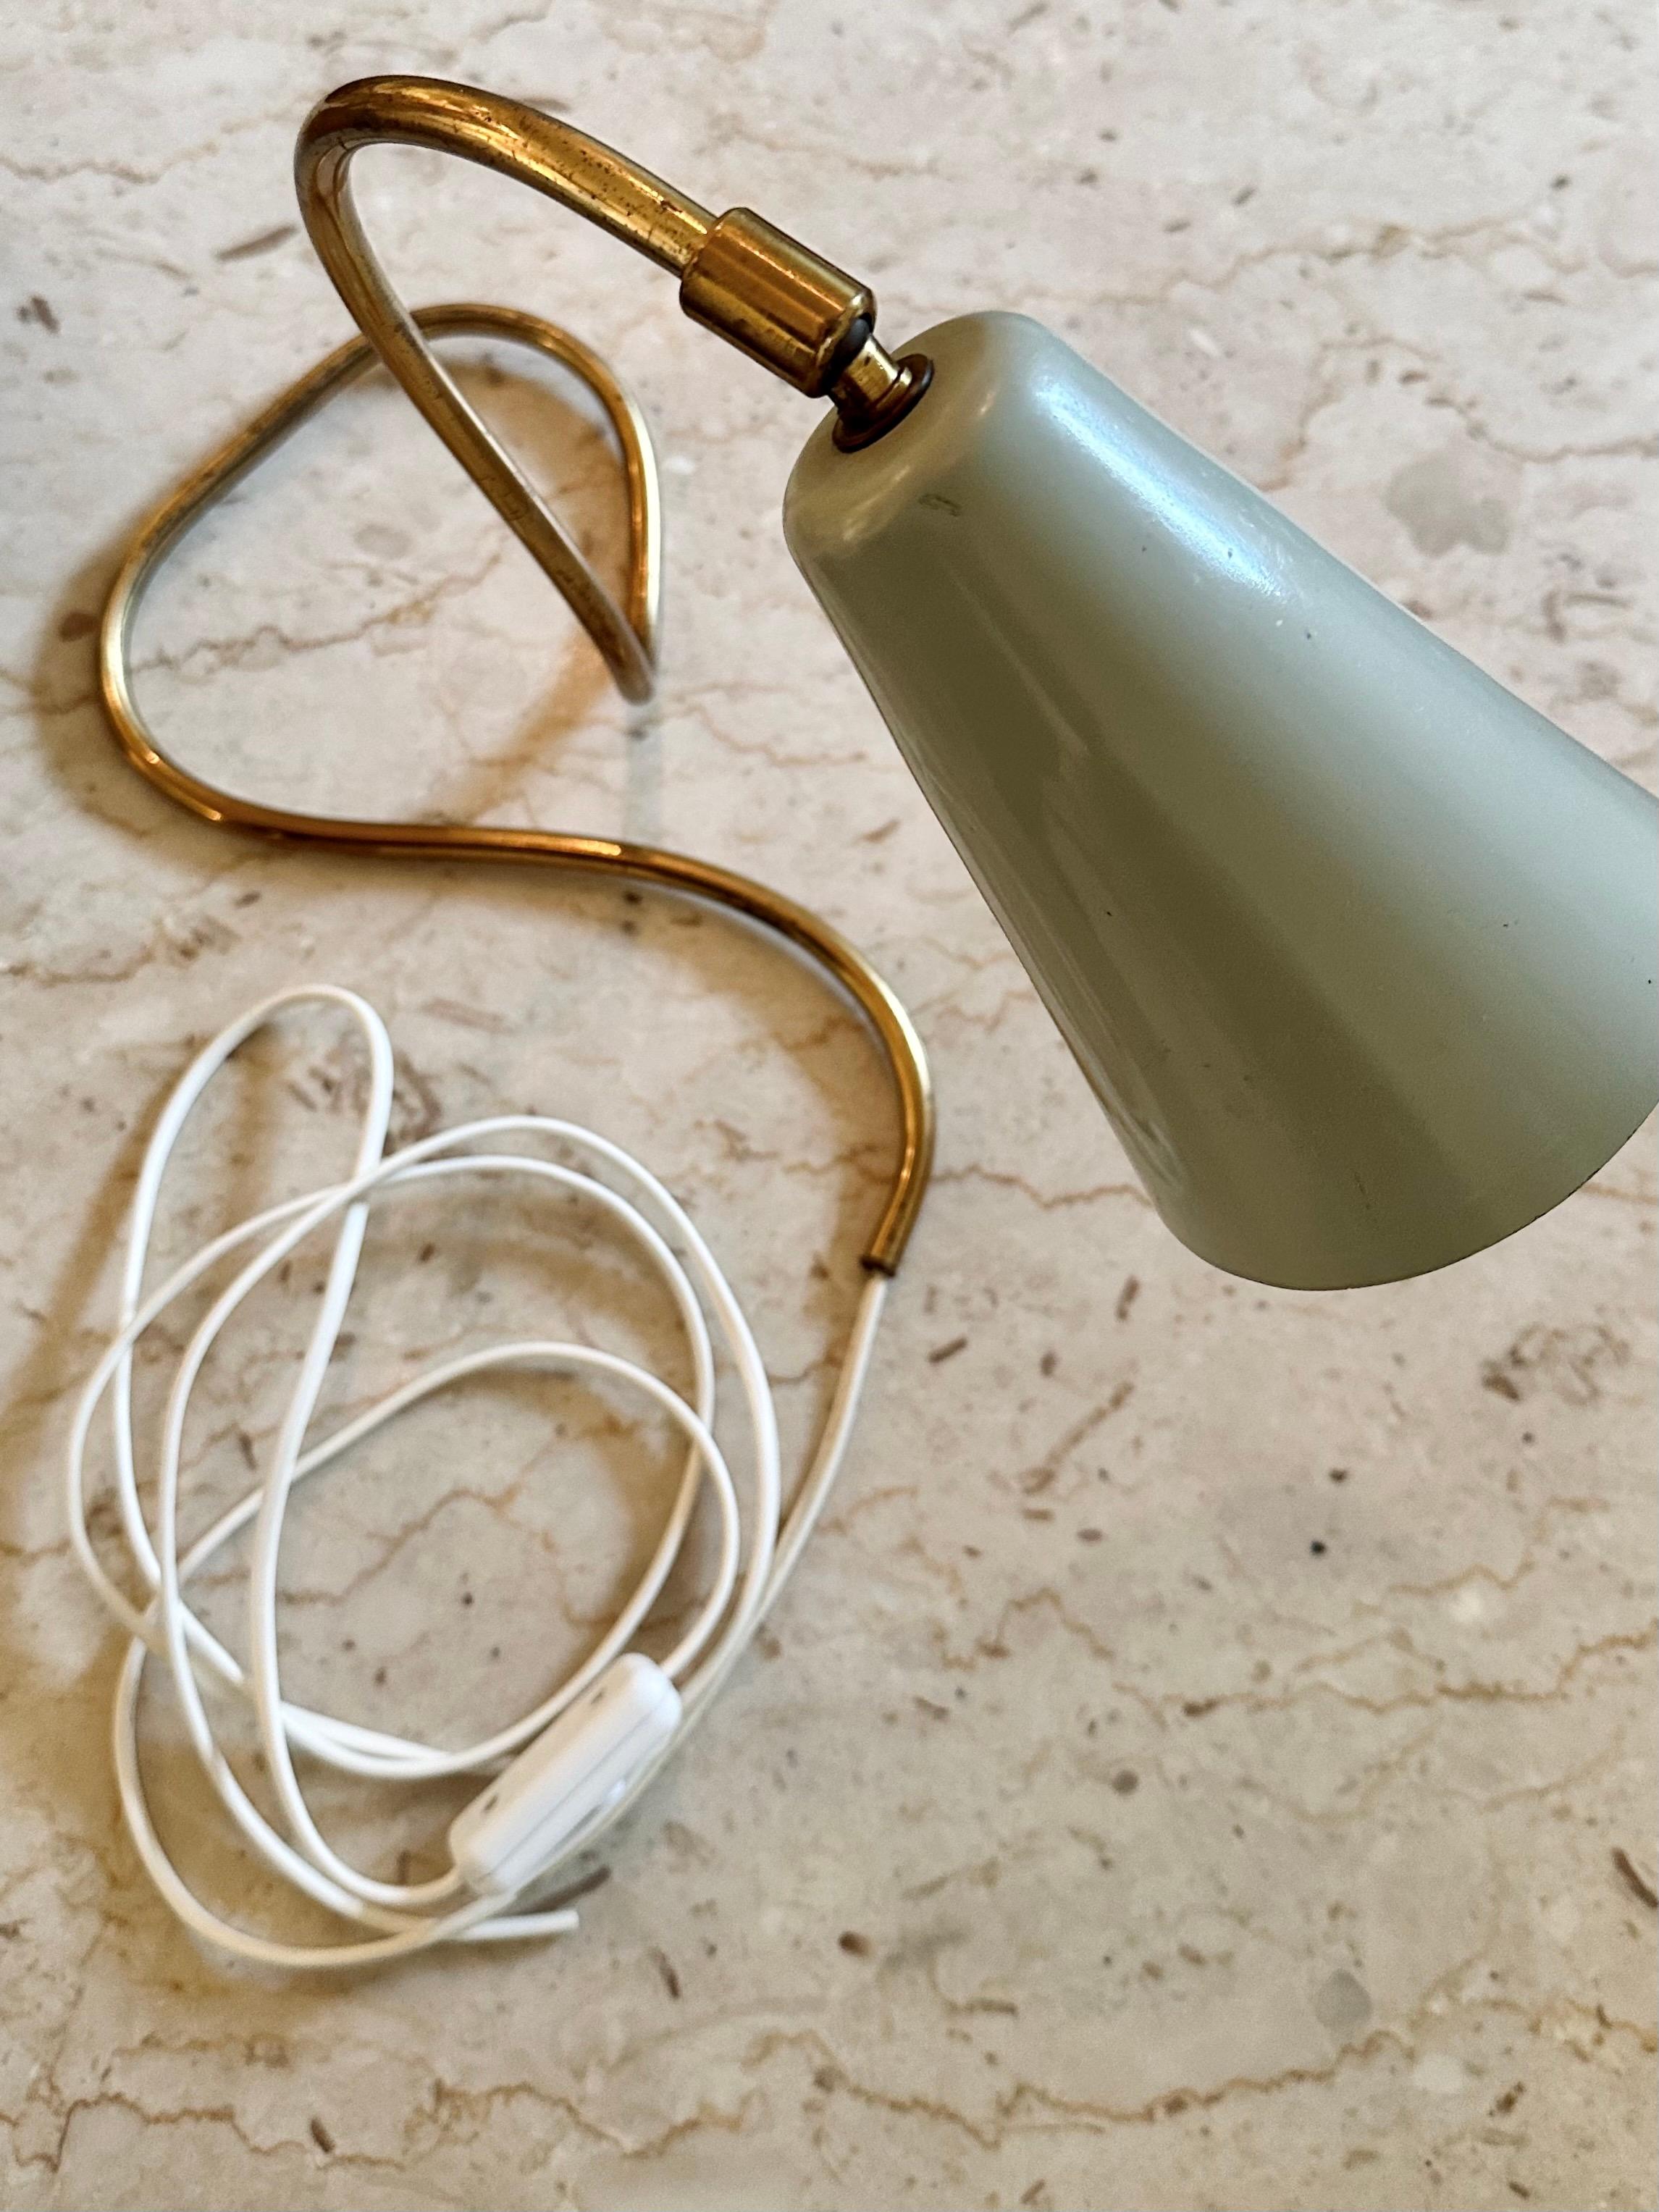 Scandinavian Modern Swedish Modern Curved Brass Table Lamp With Lacquered Shade, 1950s